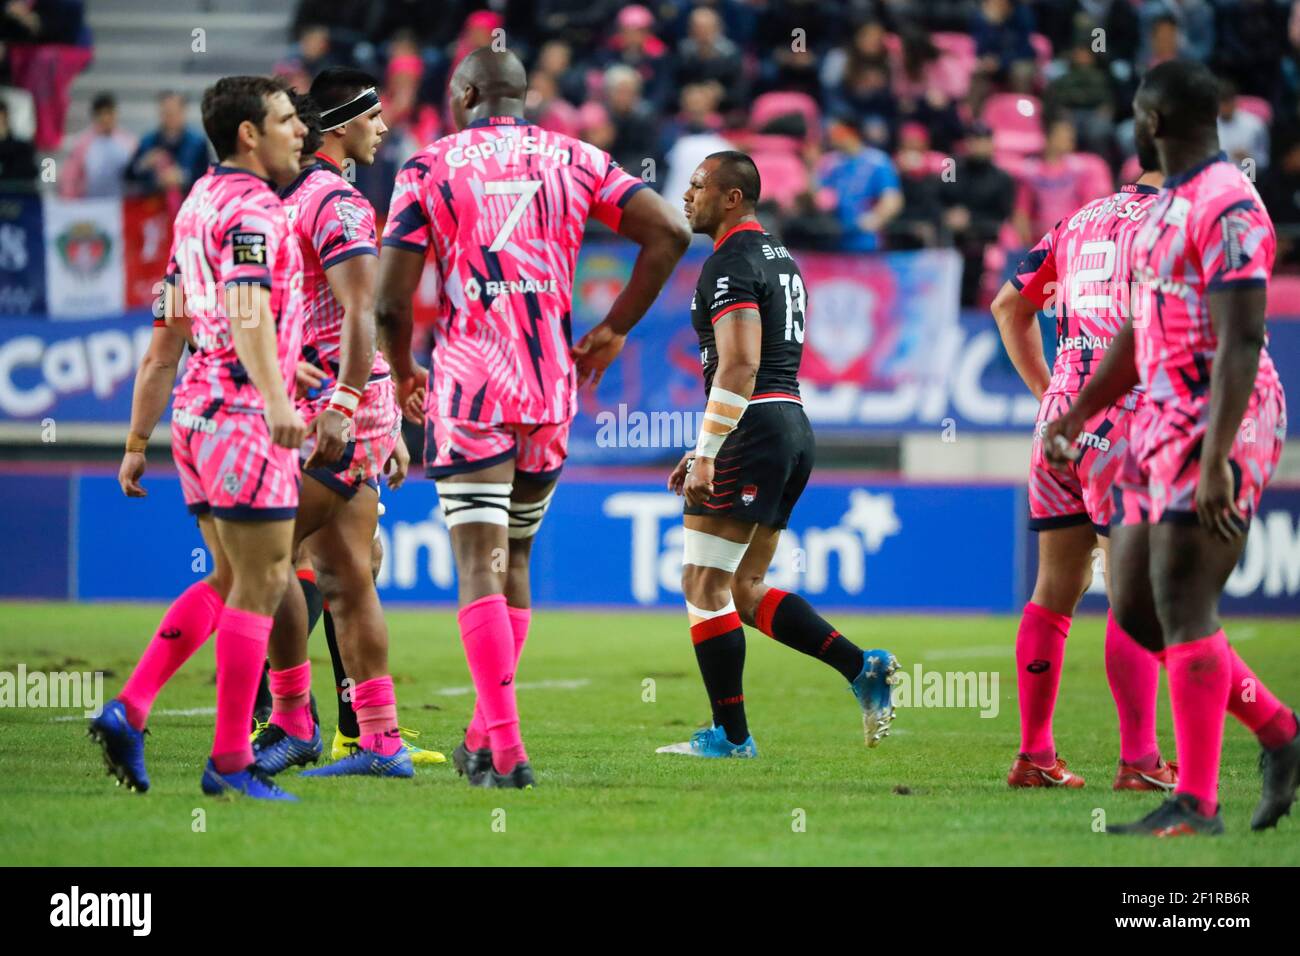 R. Wulf (Lyon Olympique Universitaire Rugby) reacted after missed to recieve the bal in hands, S. Macalou (Stade Francais Paris), J. Danty (Stade Francais Paris), N. Sanchez (Stade Francais Paris) during the French championship Top 14 rugby union match between Stade Francais Paris and Lyon OU on February 16, 2019 at Jean Bouin stadium in Paris, France - Photo Stephane Allaman / DPPI Stock Photo